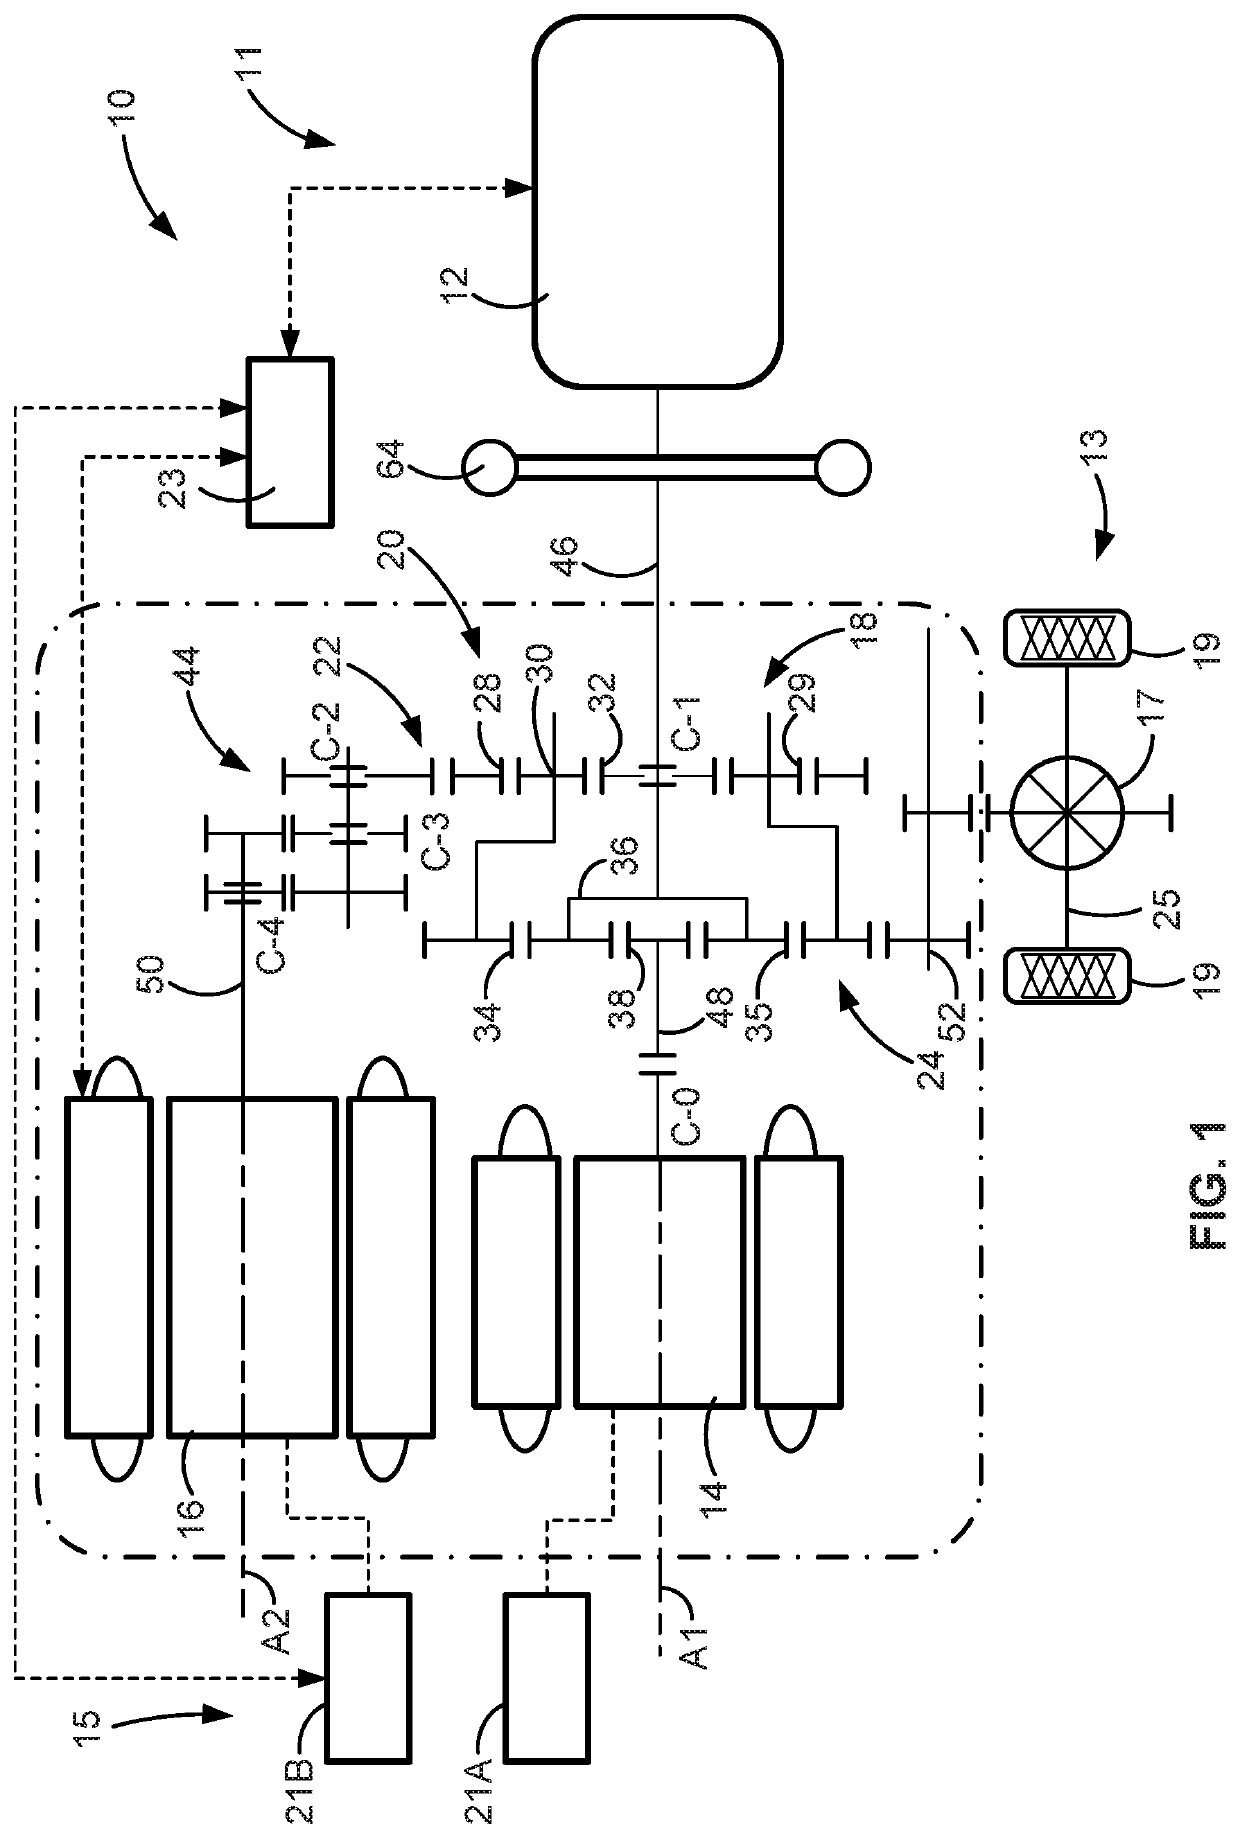 Battery pack voltage-switching systems and control logic for multi-pack electric-drive motor vehicles